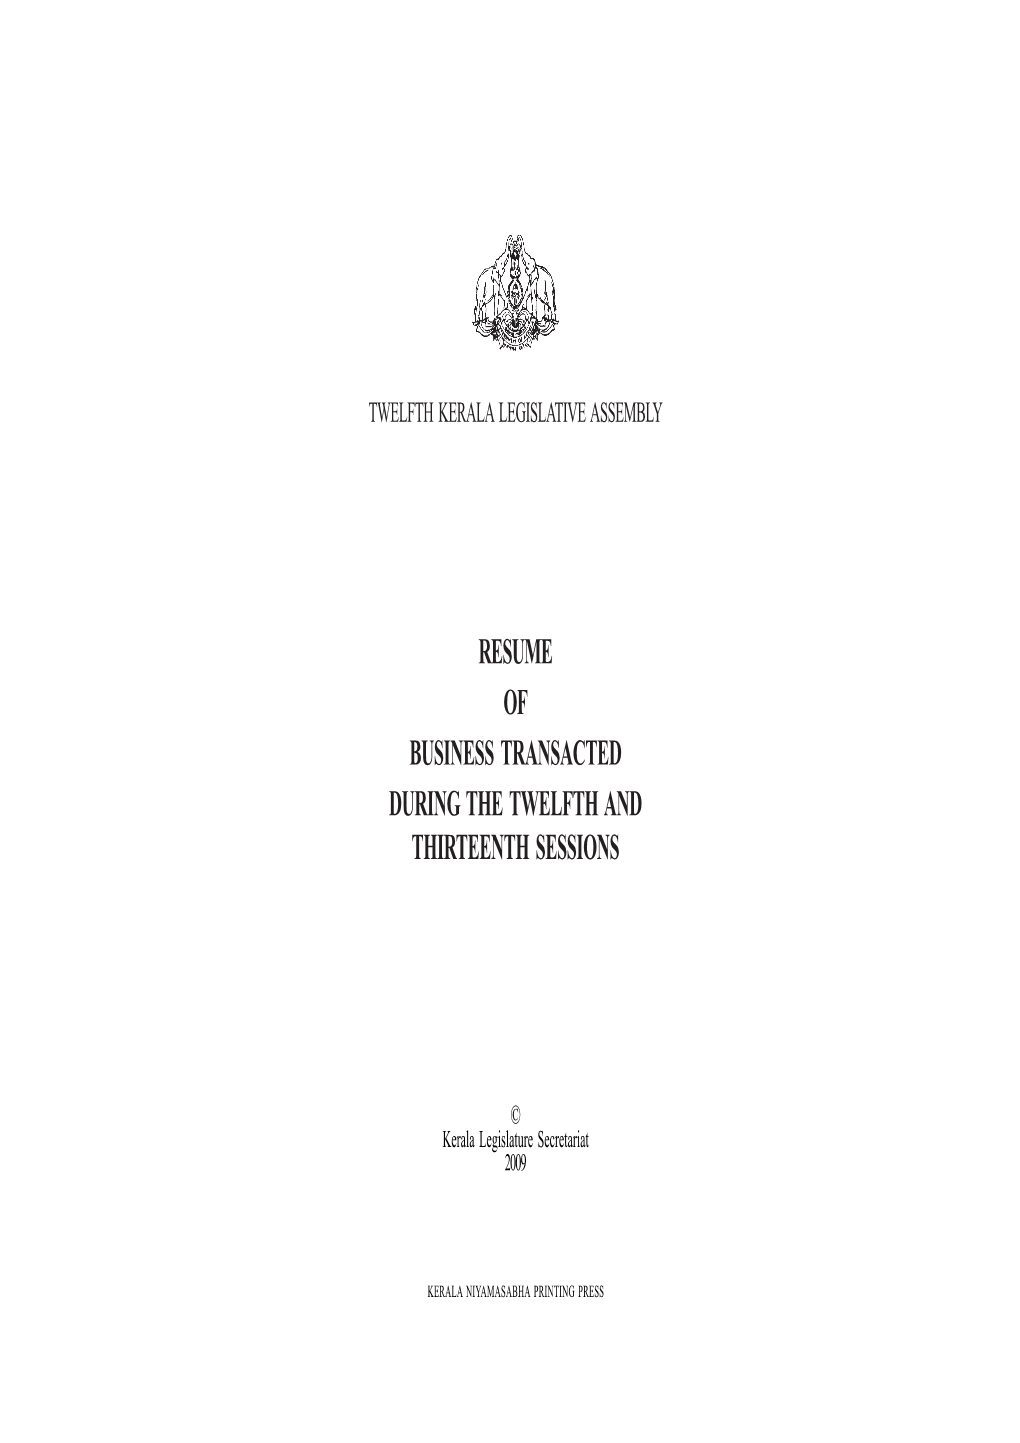 Resume of Business Transacted During the Twelfth and Thirteenth Sessions